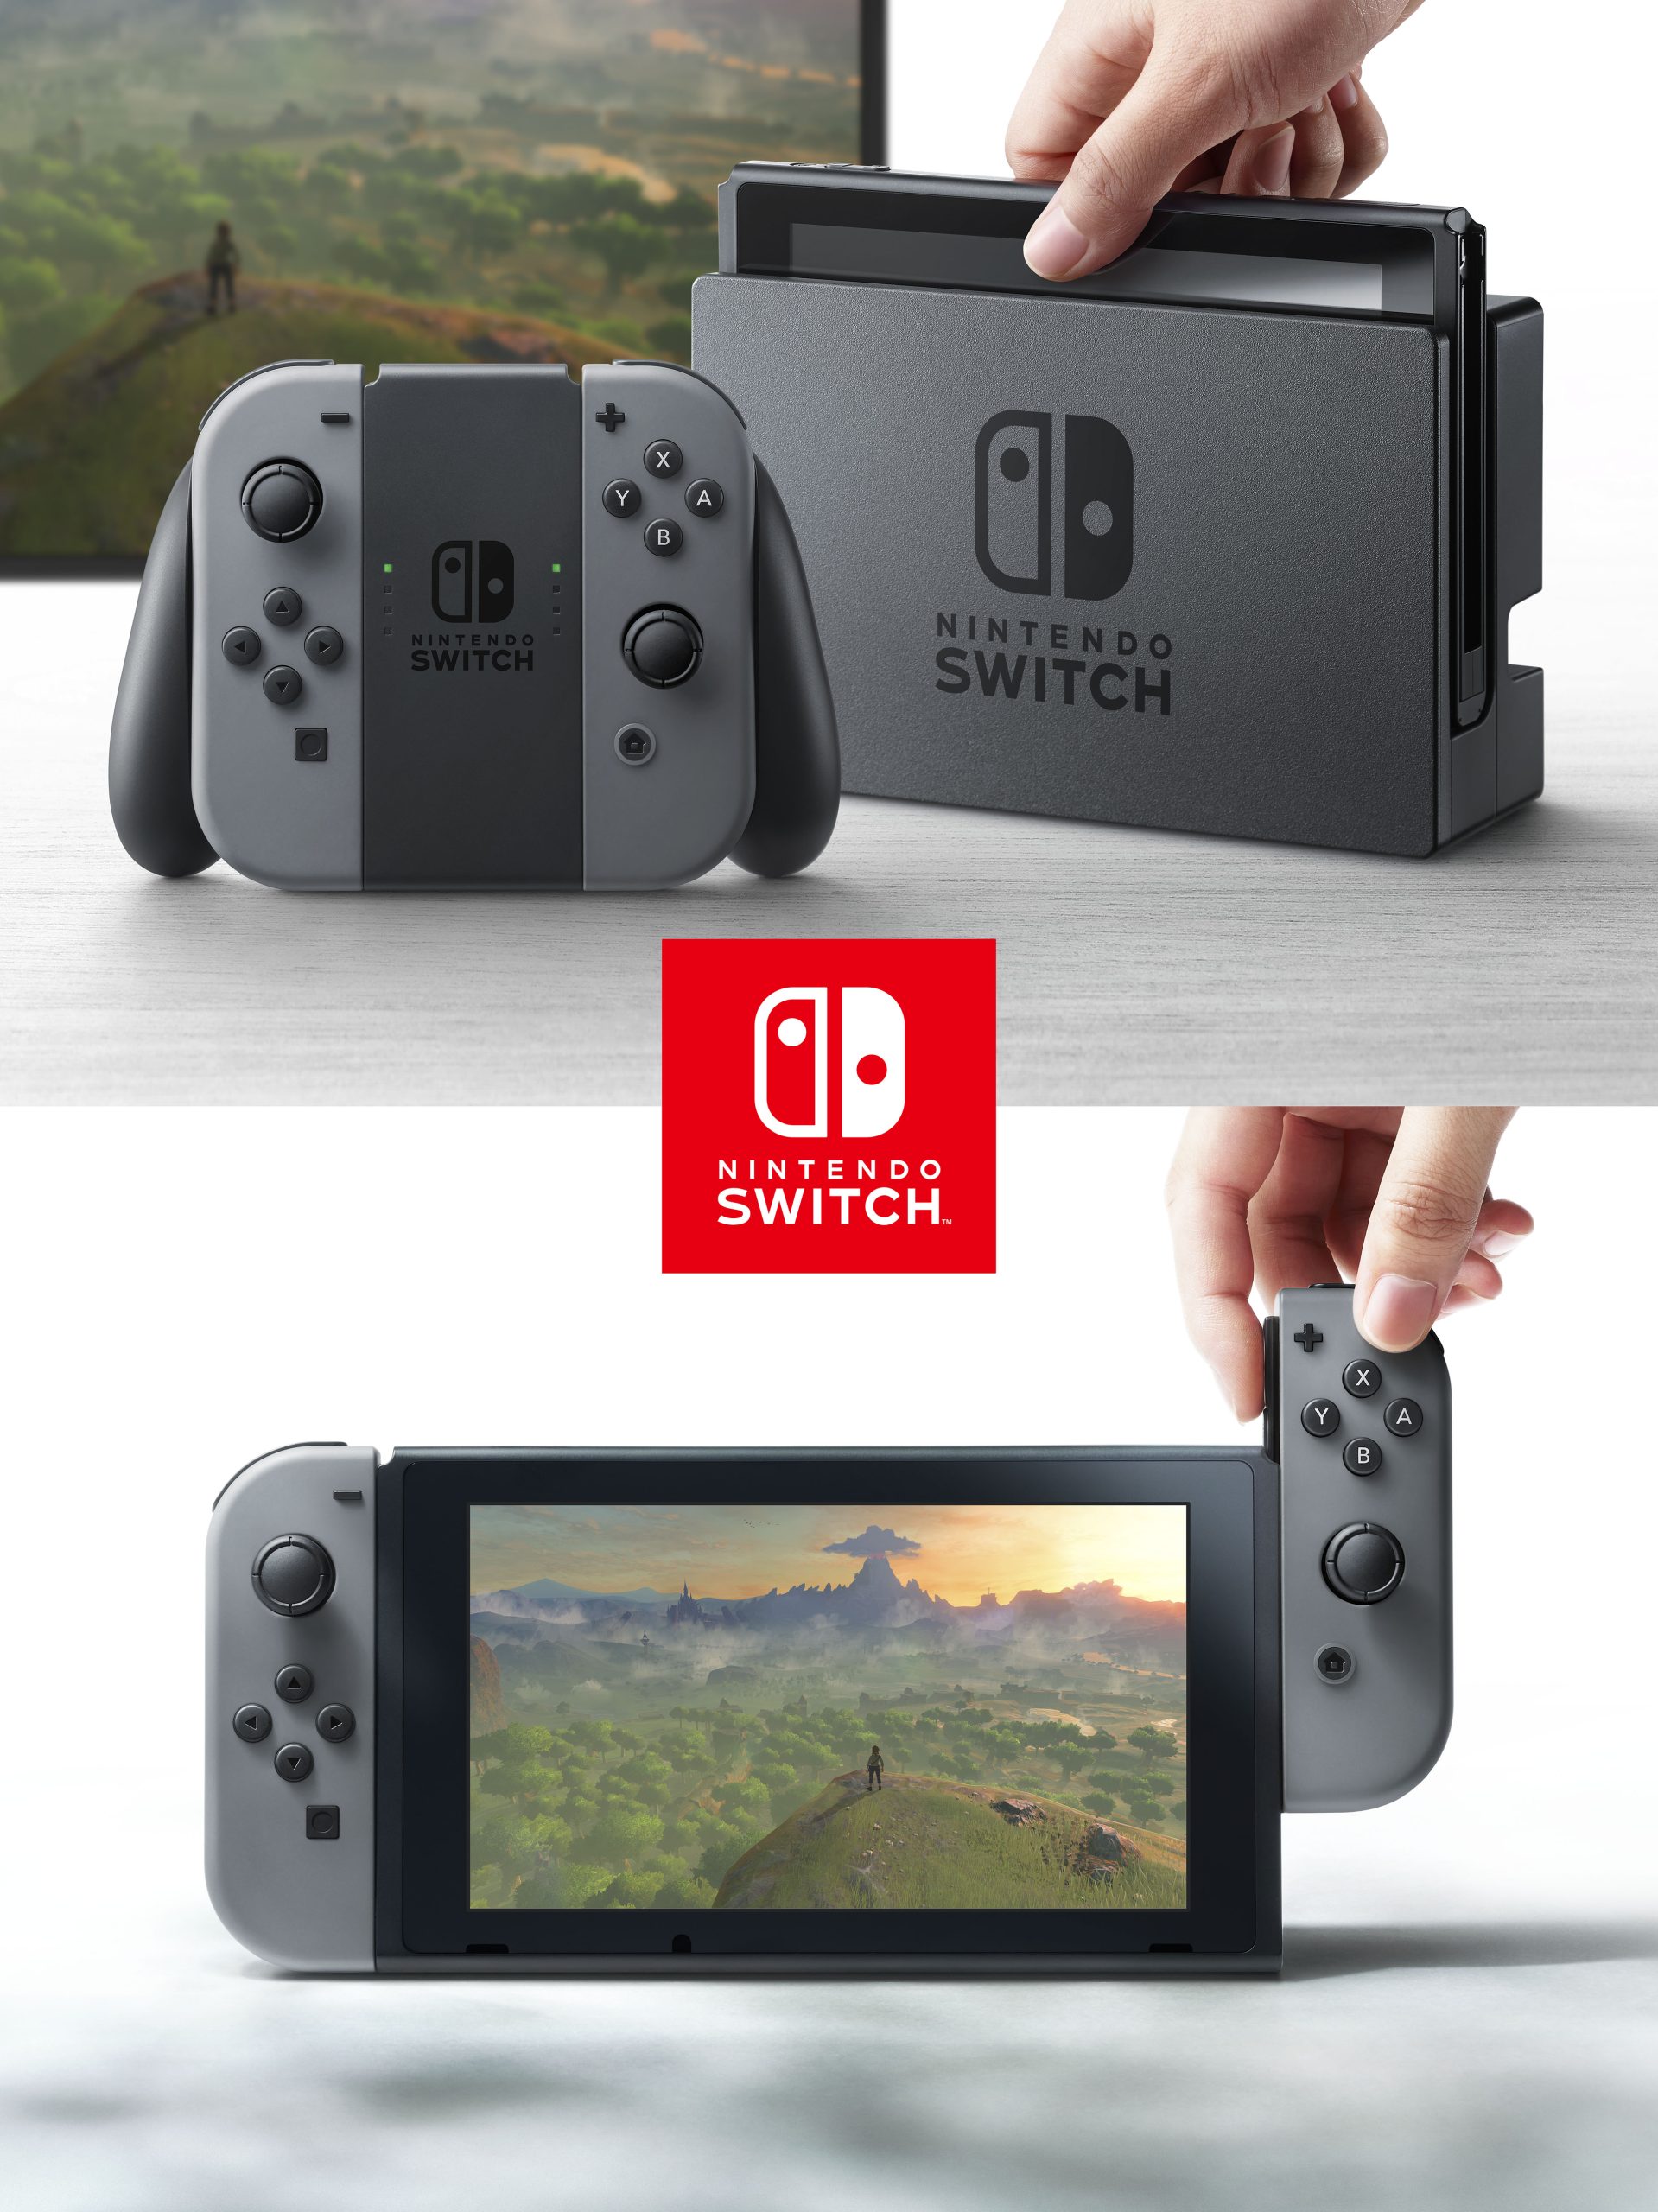 Nintendo reveals the Switch, its new home/portable hybrid